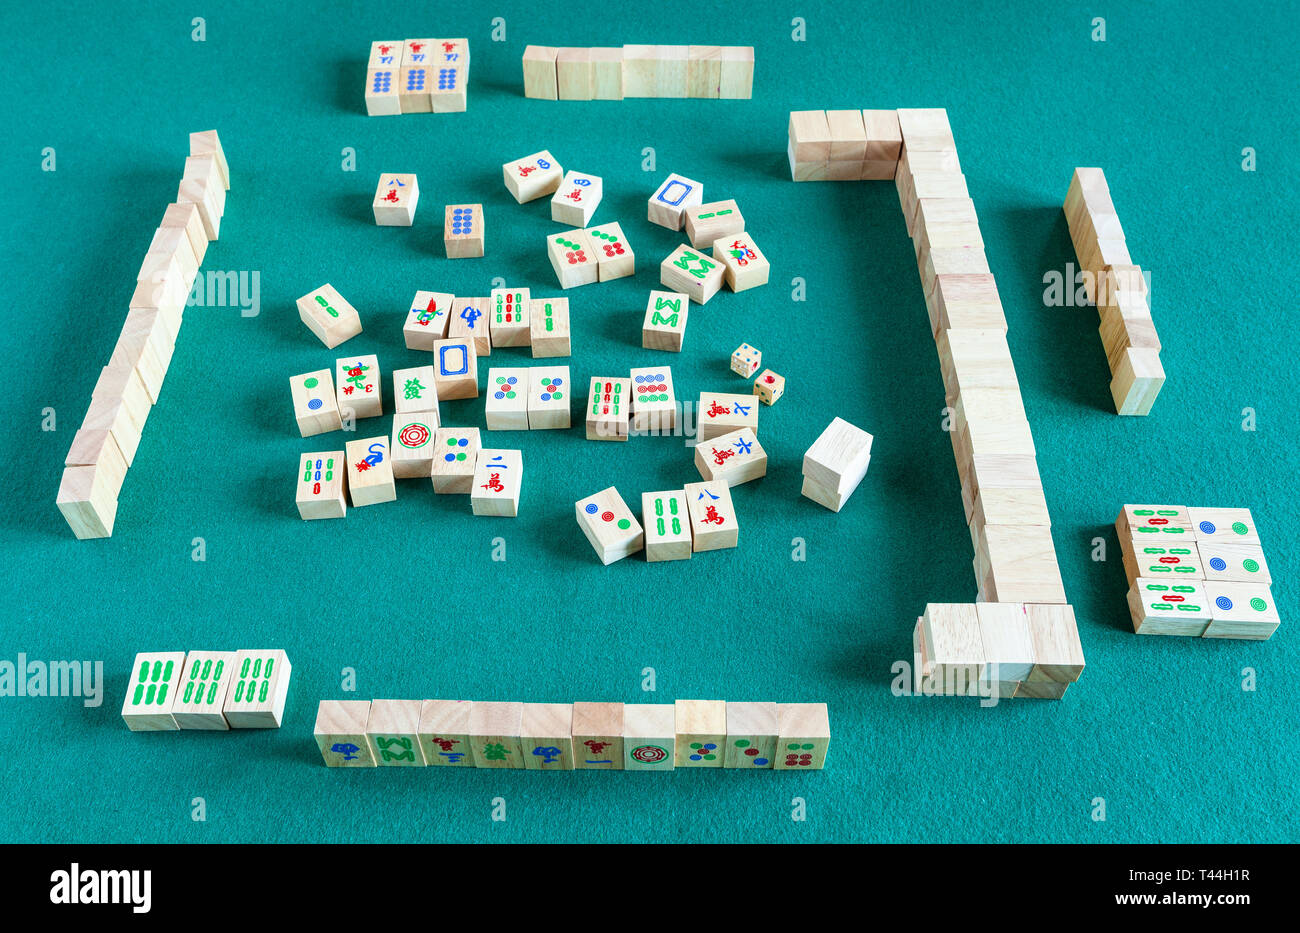 above view of gameboard of mahjong game, tile-based chinese strategy board game on green baize table Stock Photo